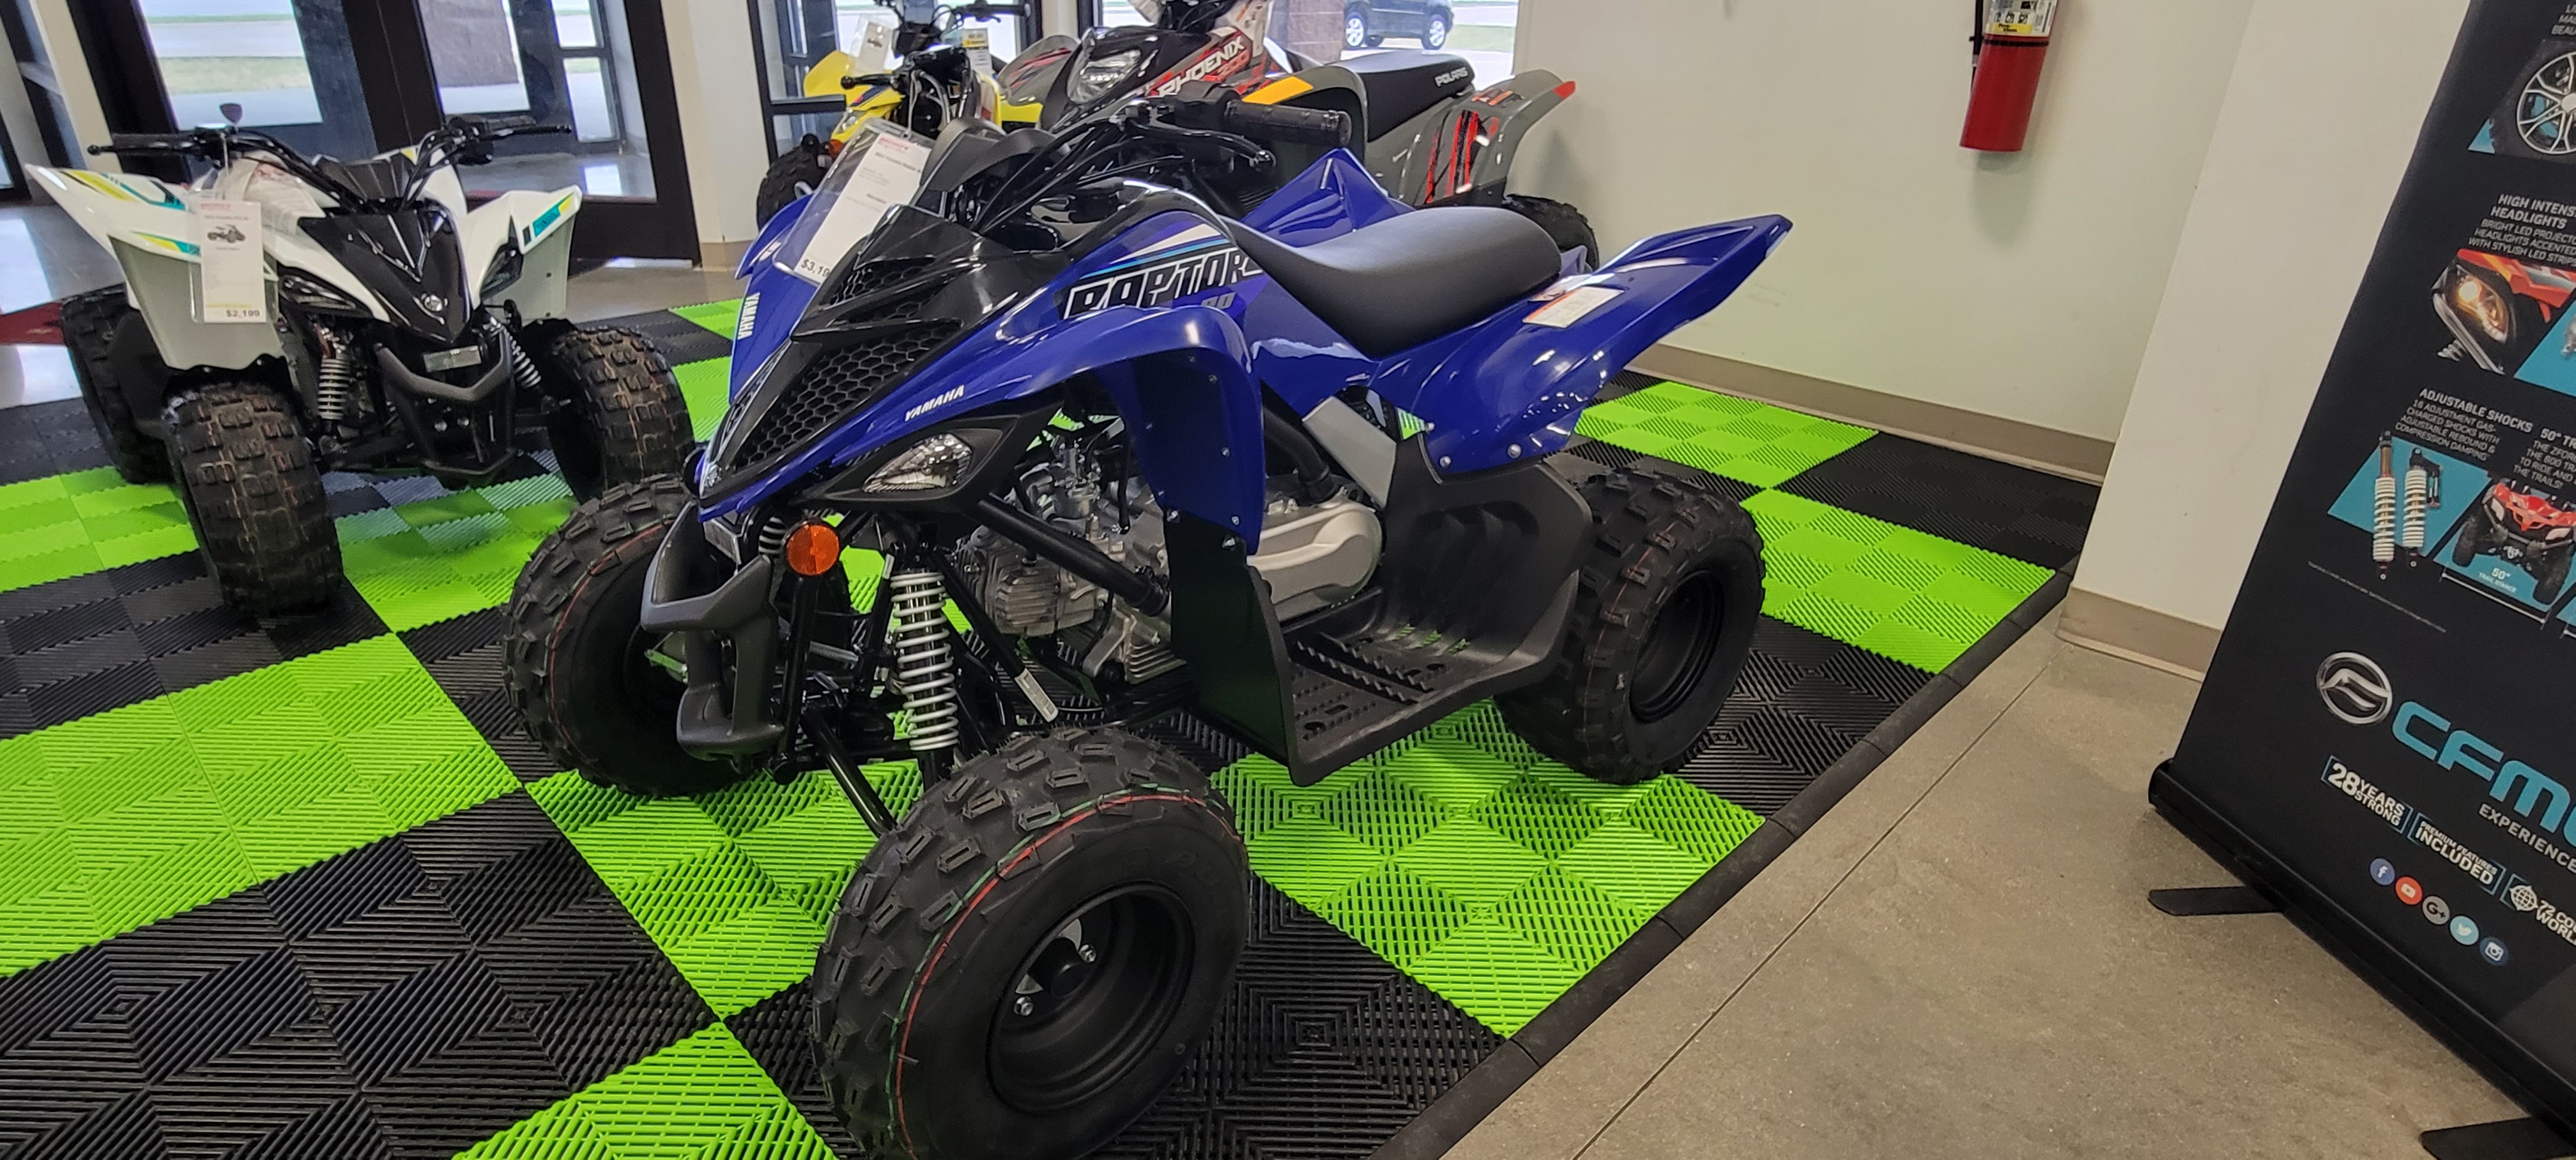 2022 Yamaha Raptor 90 at Brenny's Motorcycle Clinic, Bettendorf, IA 52722